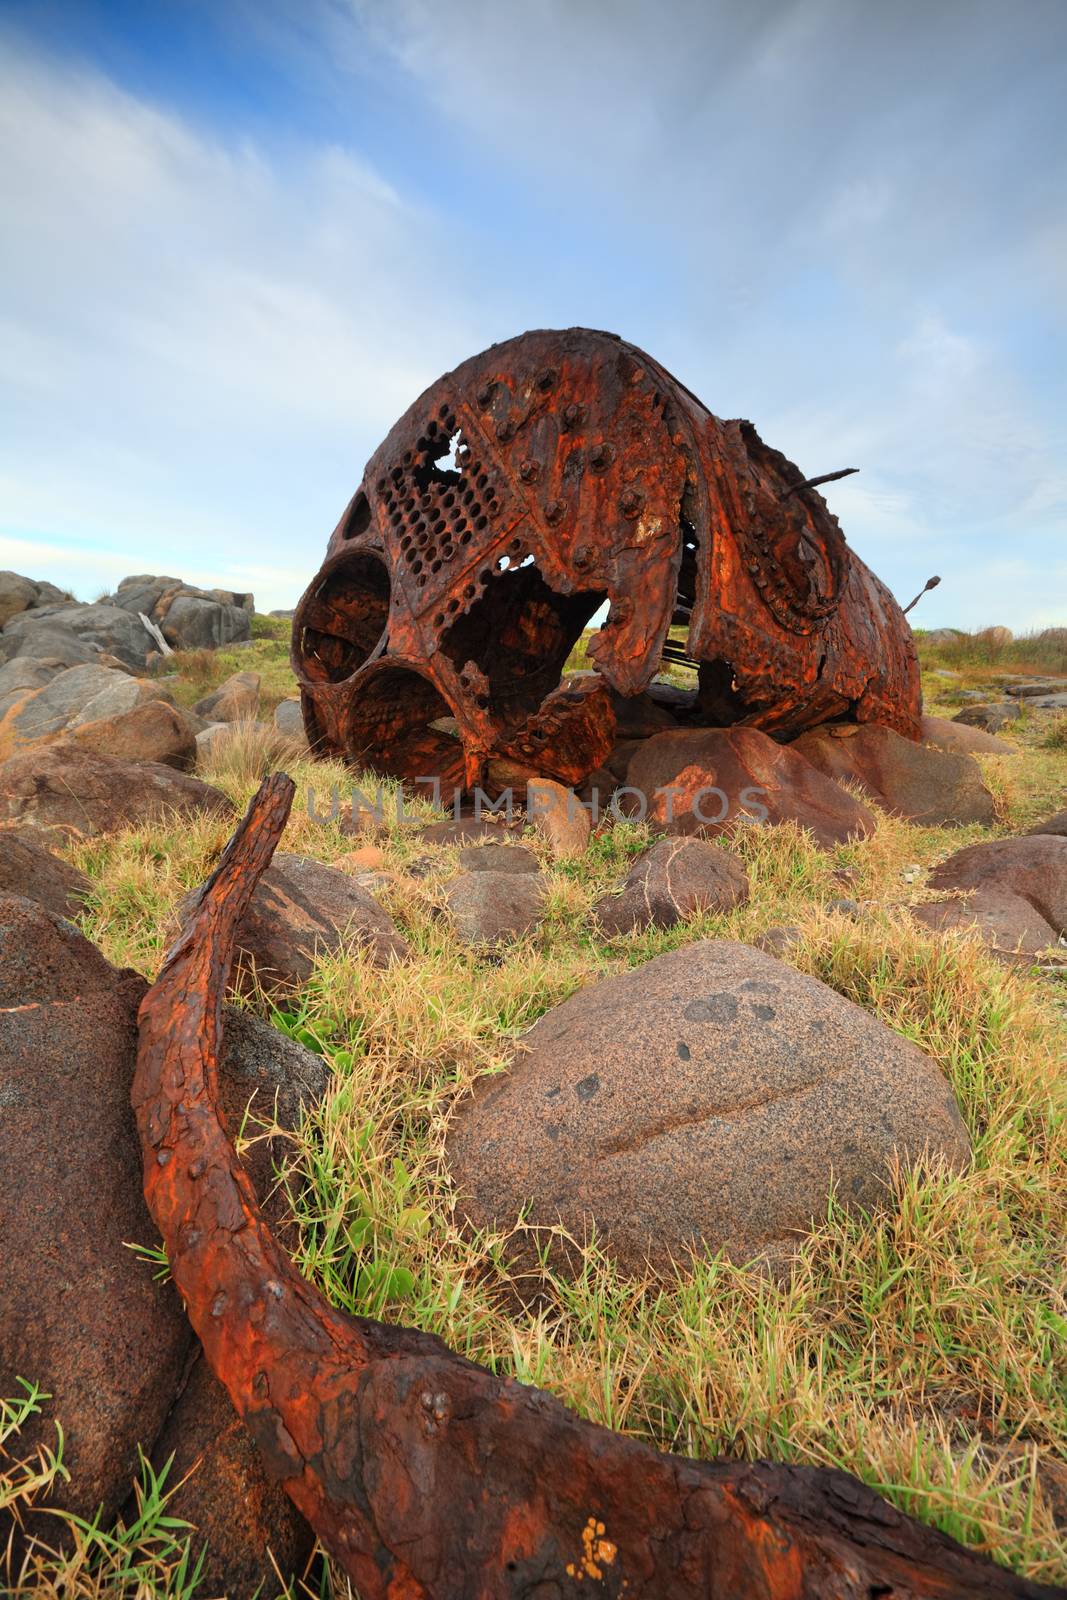 Rusting remains of the old shipwreck, The SS Monaro at Kellys Point, a reminder of the power of the ocean and elements of nature. shipwrecked 1879